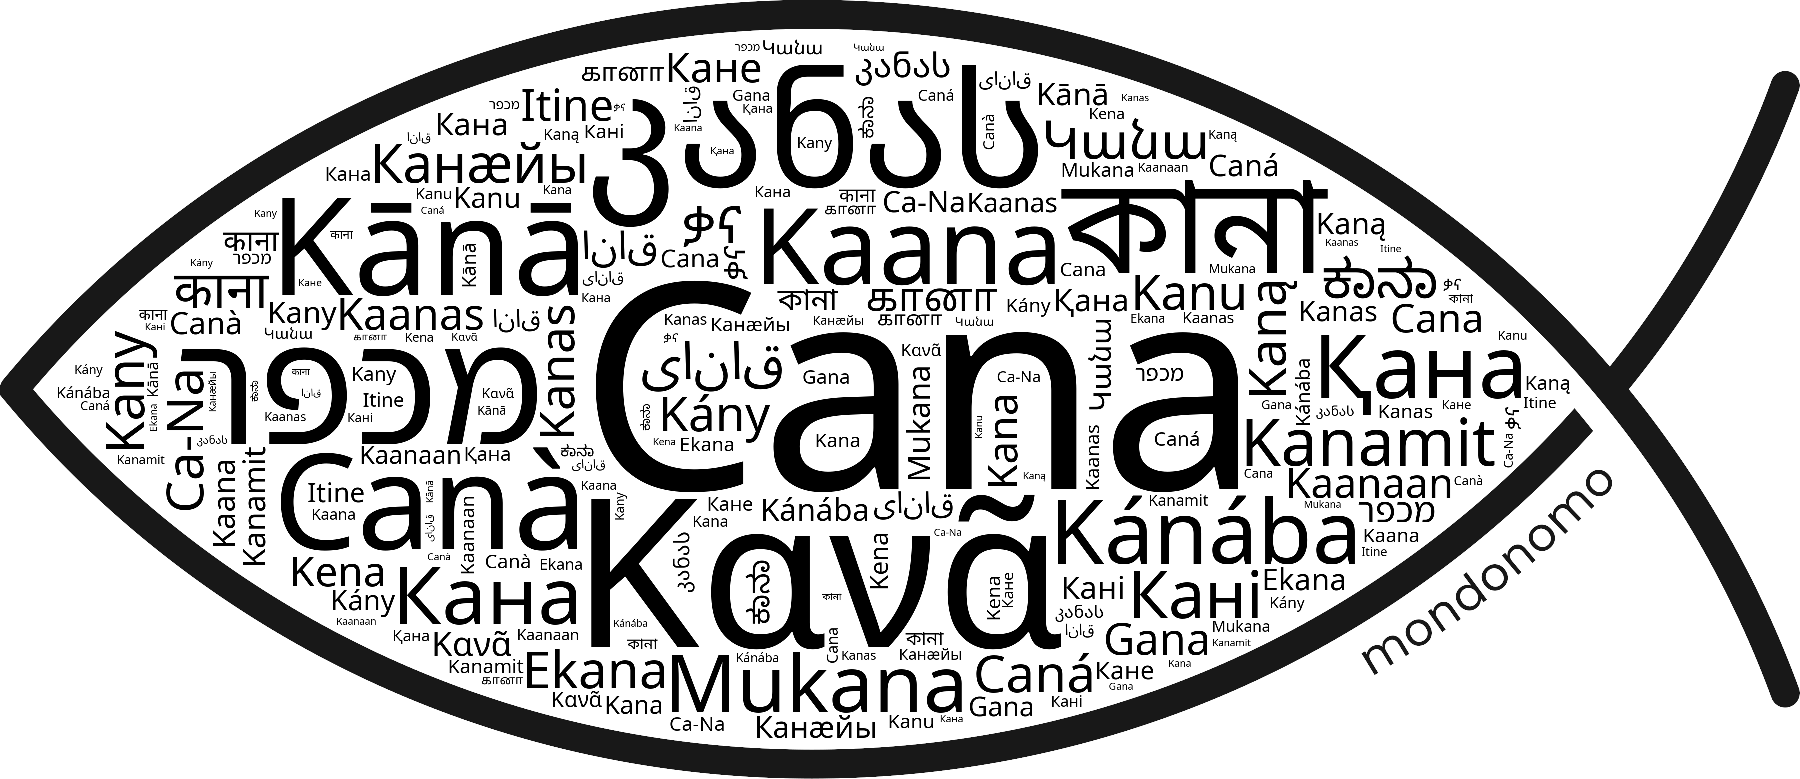 Name Cana in the world's Bibles